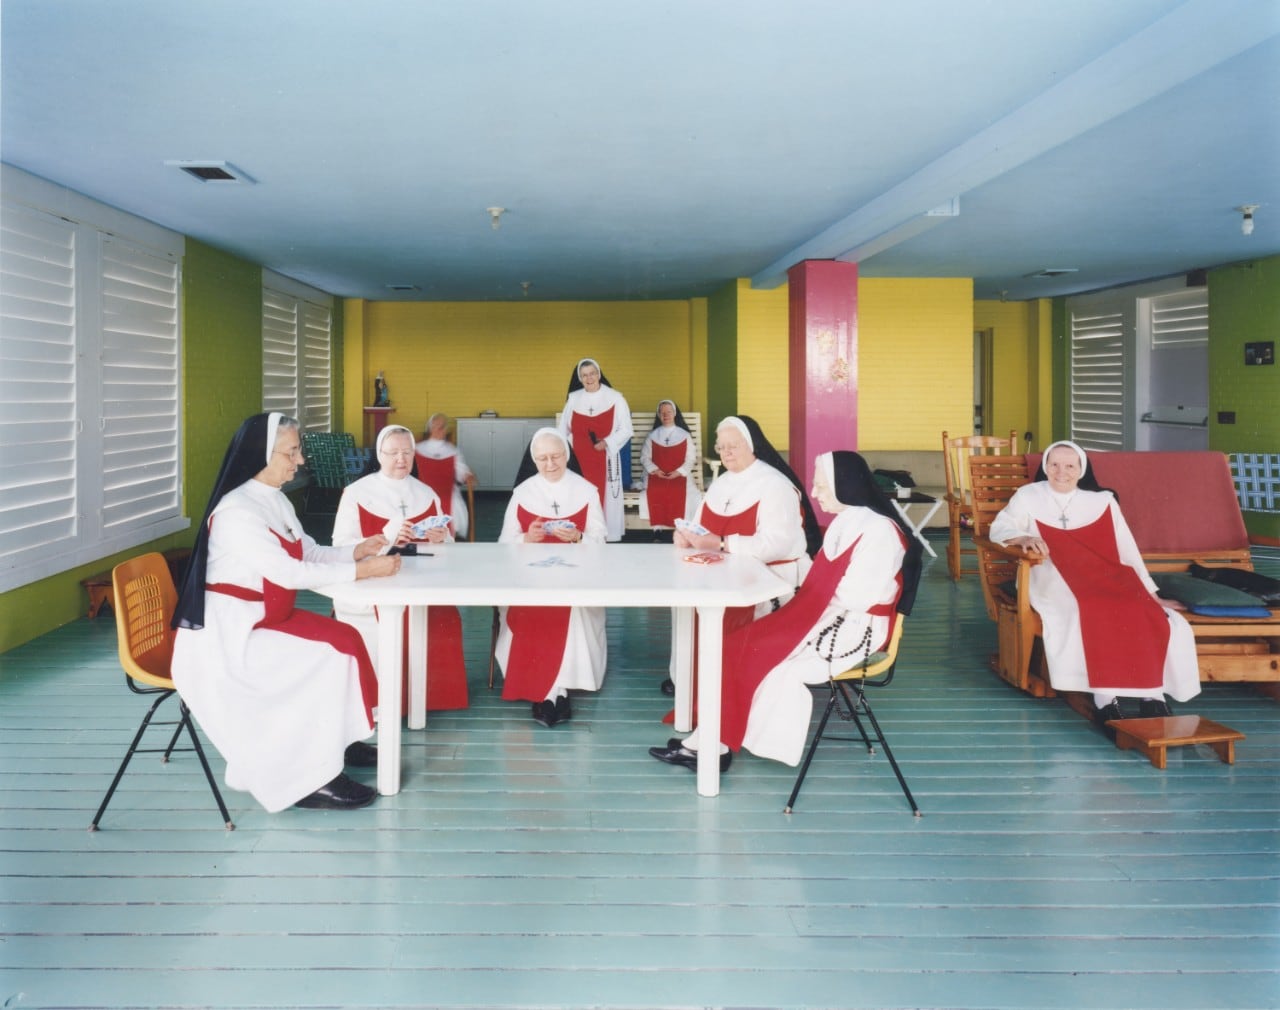 Group of nuns in common room playing cards and sitting